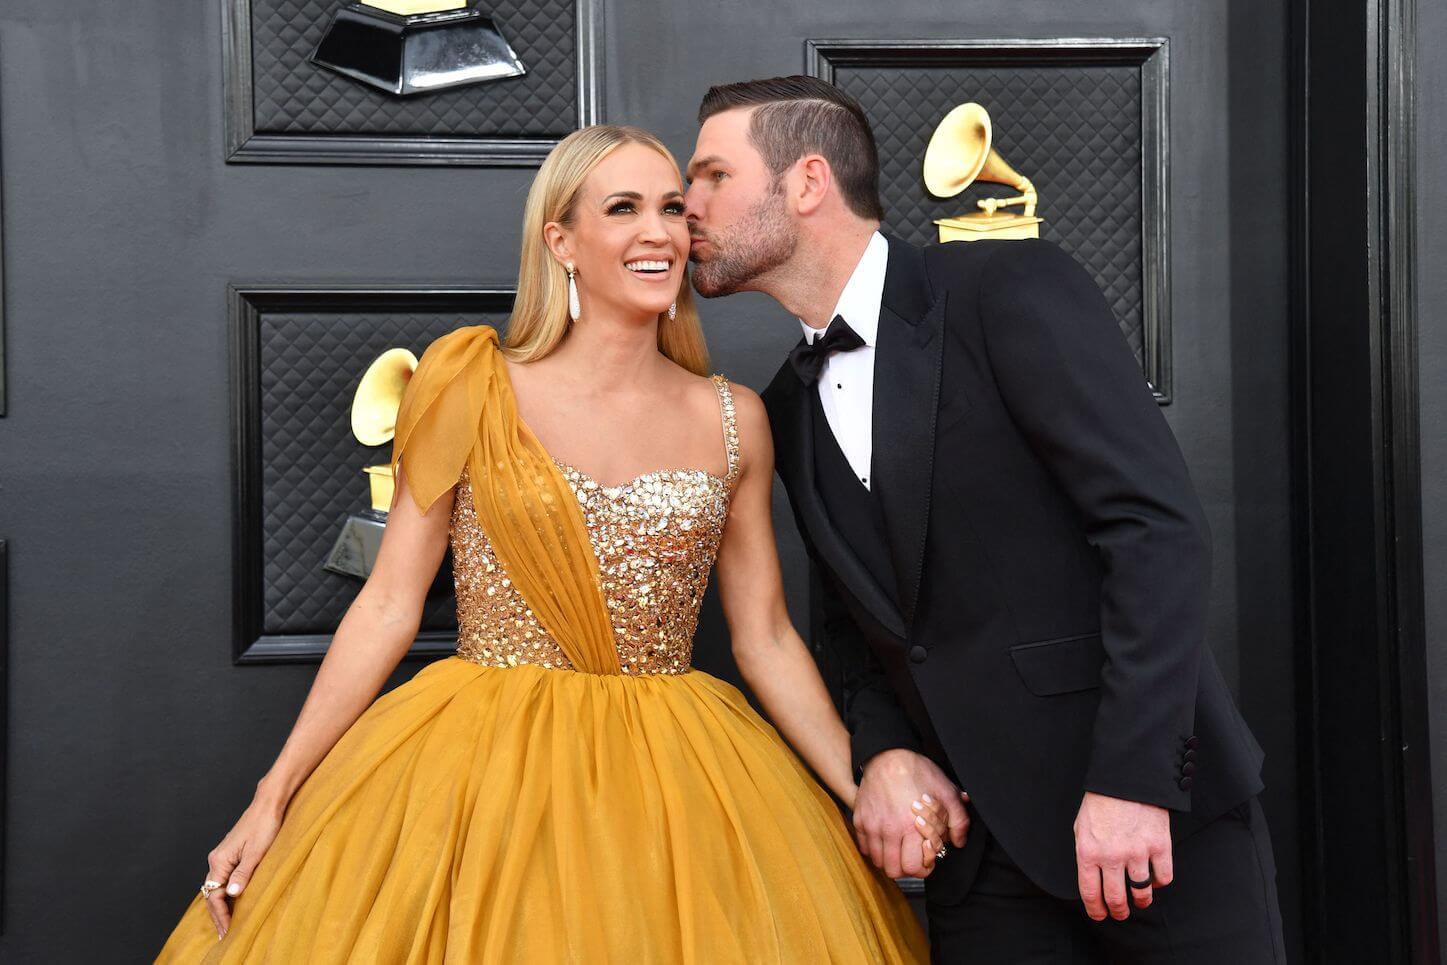 Carrie Underwood standing with her husband, Mike Fisher, kissing her cheek